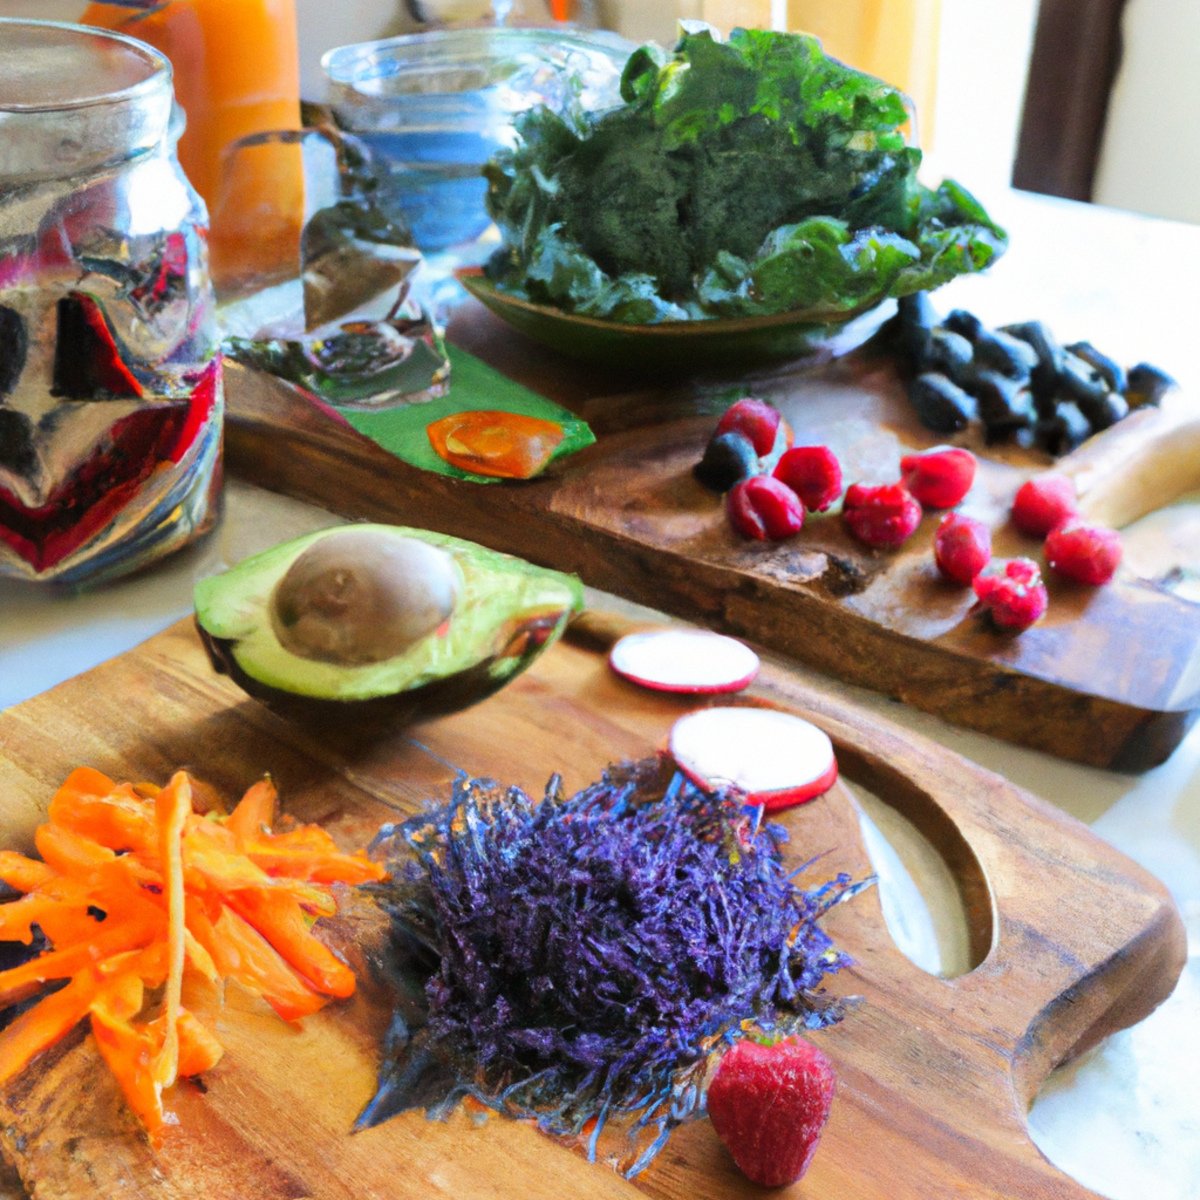 The photo features a wooden cutting board with an array of colorful fruits and vegetables, including sliced avocado, blueberries, raspberries, kale leaves, and carrots. A jar of fermented sauerkraut sits in the background, while a small dish of chia seeds and a glass of kombucha complete the scene. The vibrant colors and textures of the foods suggest a variety of nutrients and flavors, all of which can contribute to a healthy gut.